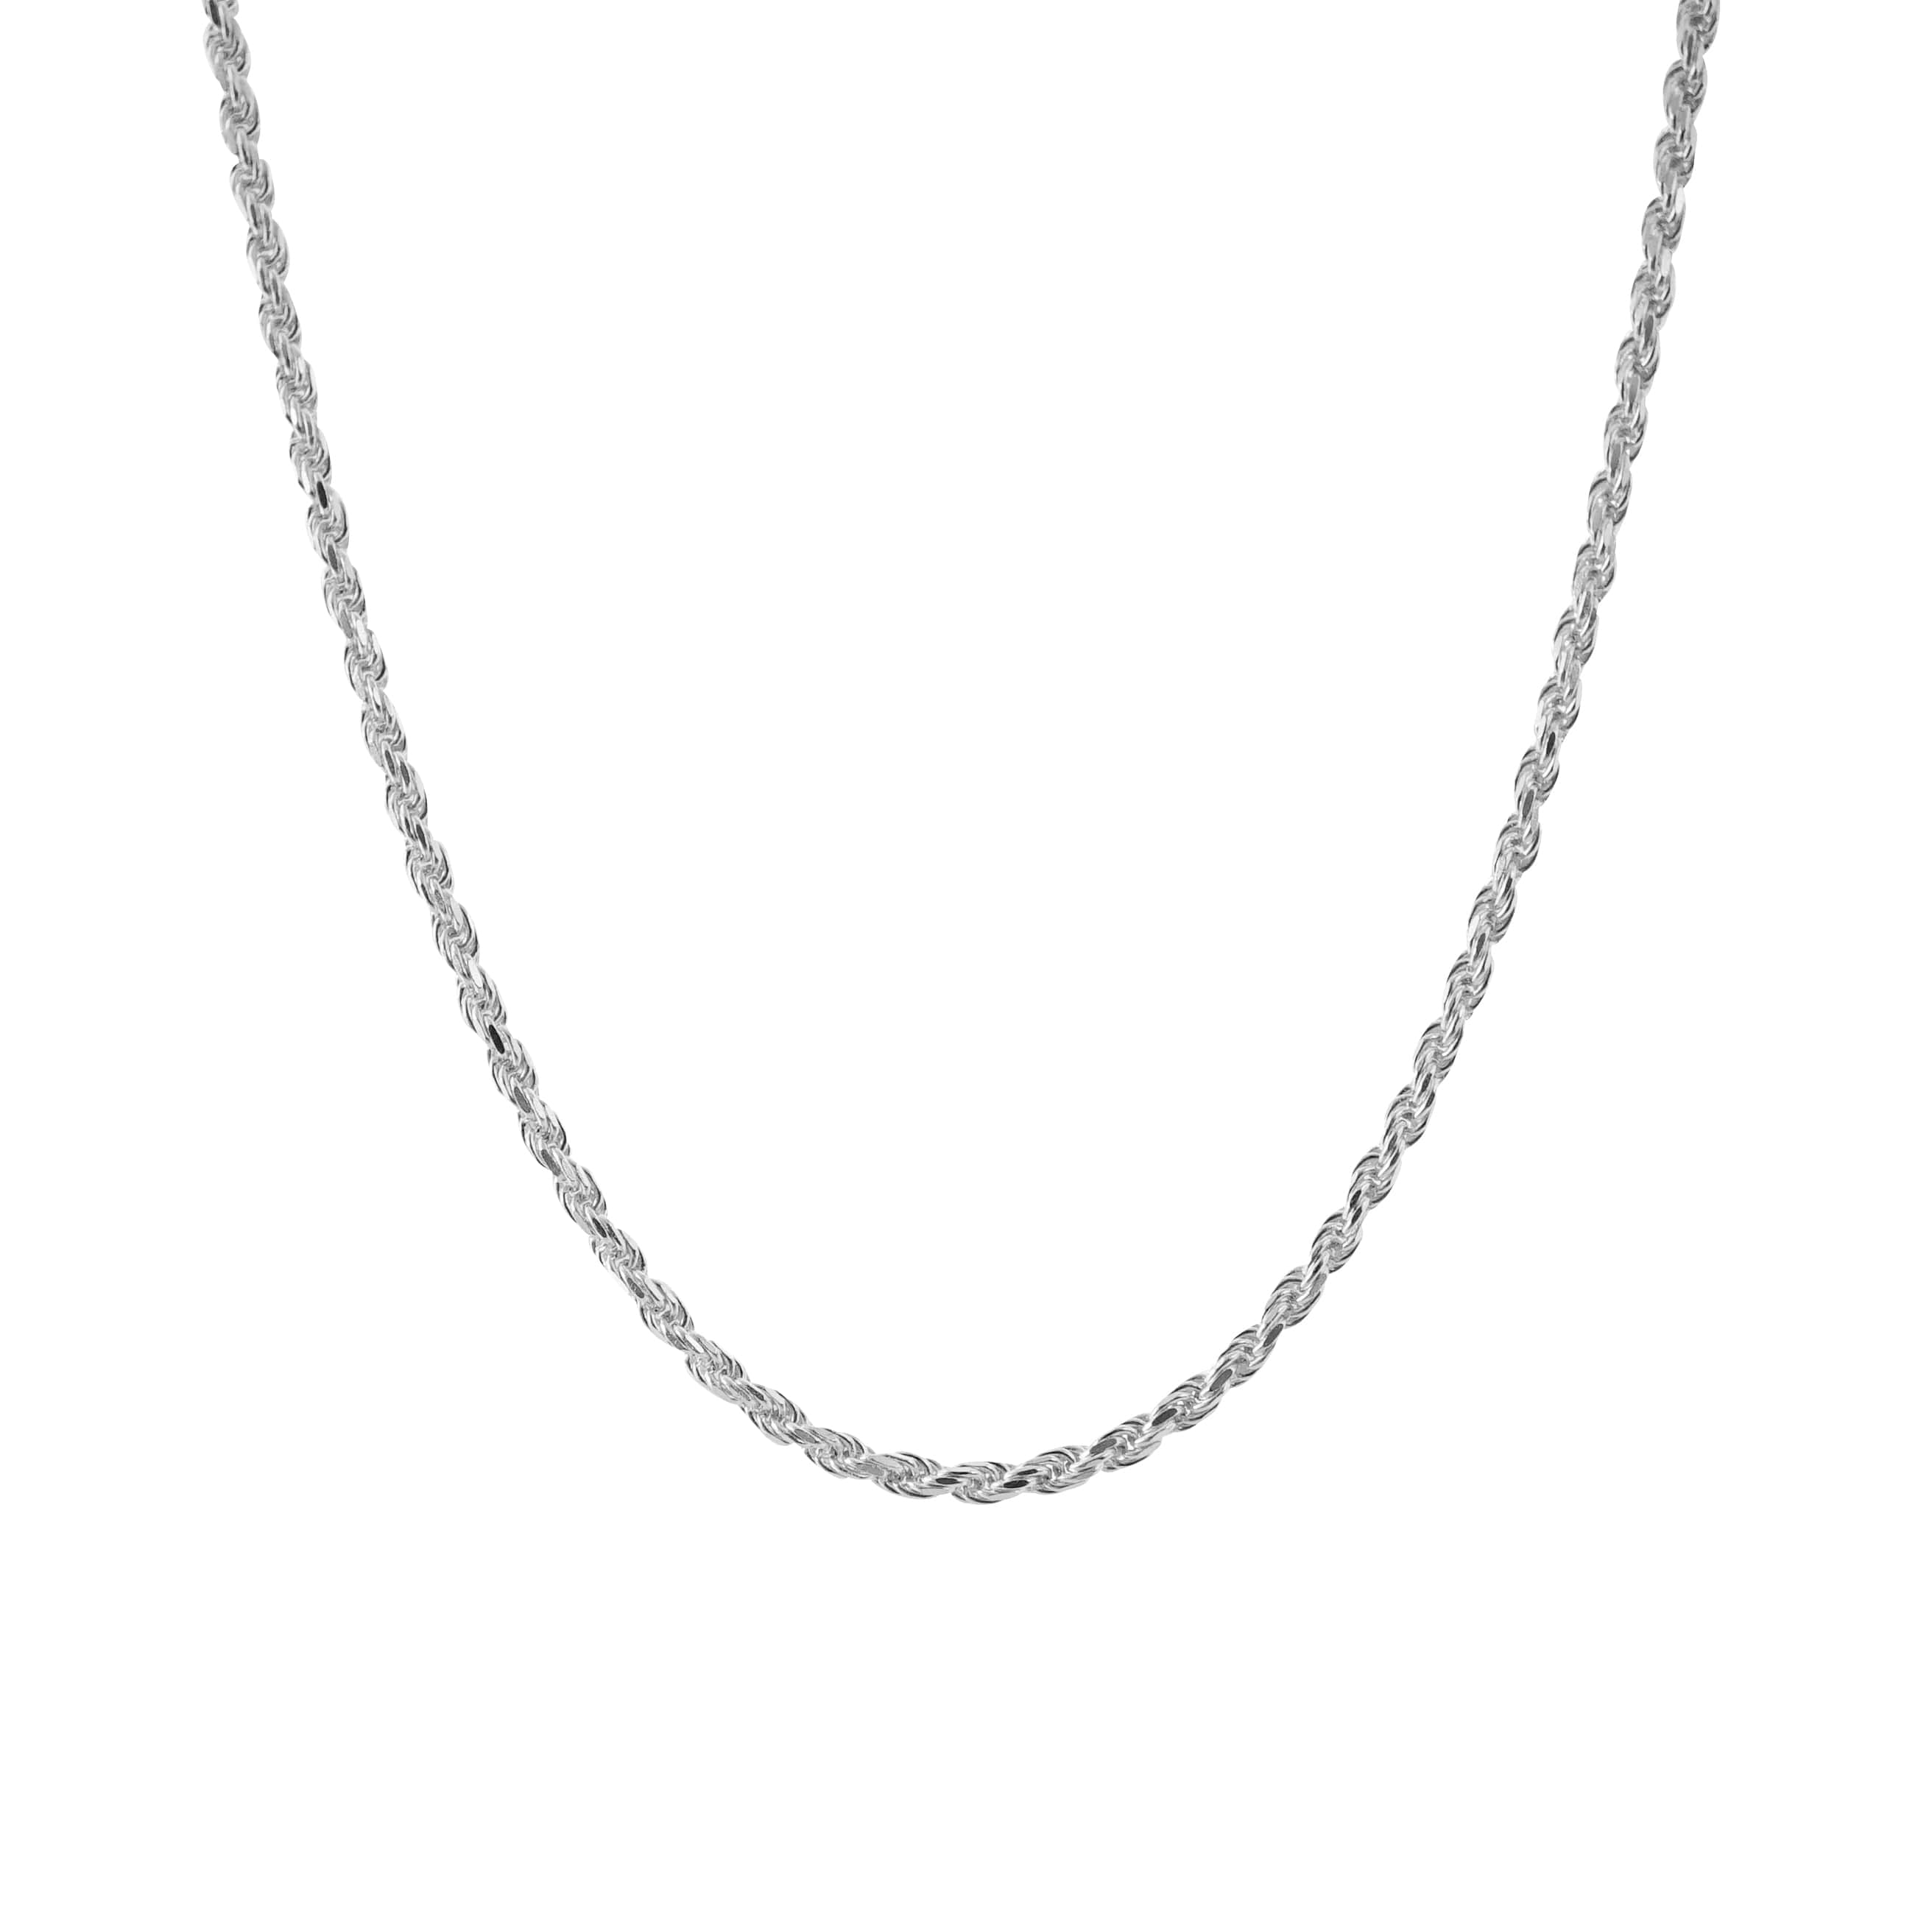 925 sterling silver necklace for men in rope style